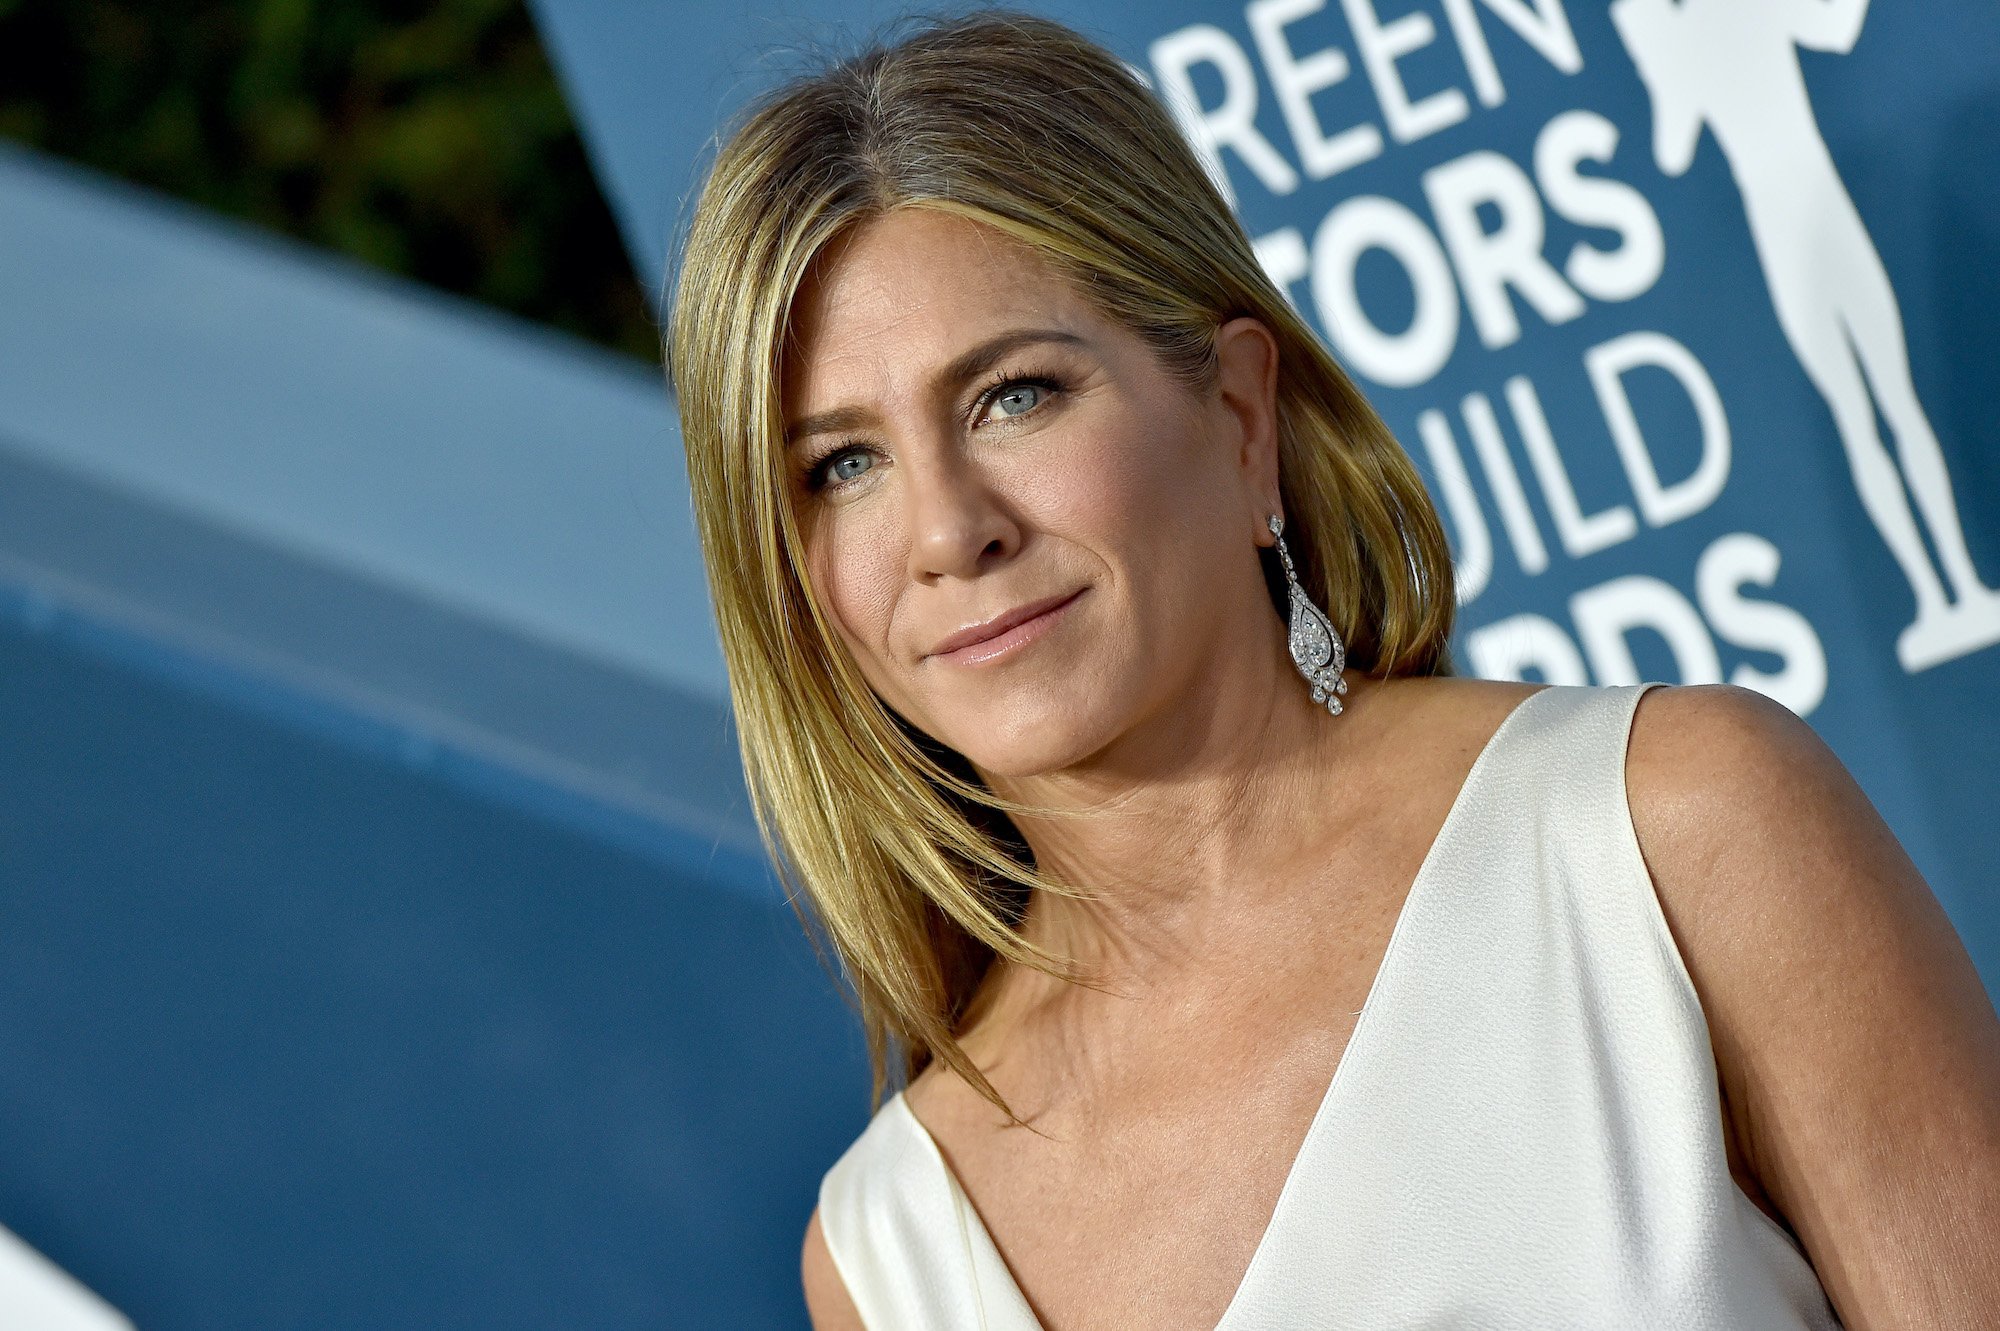 Jennifer Aniston smiling, turned to the side looking at the camera